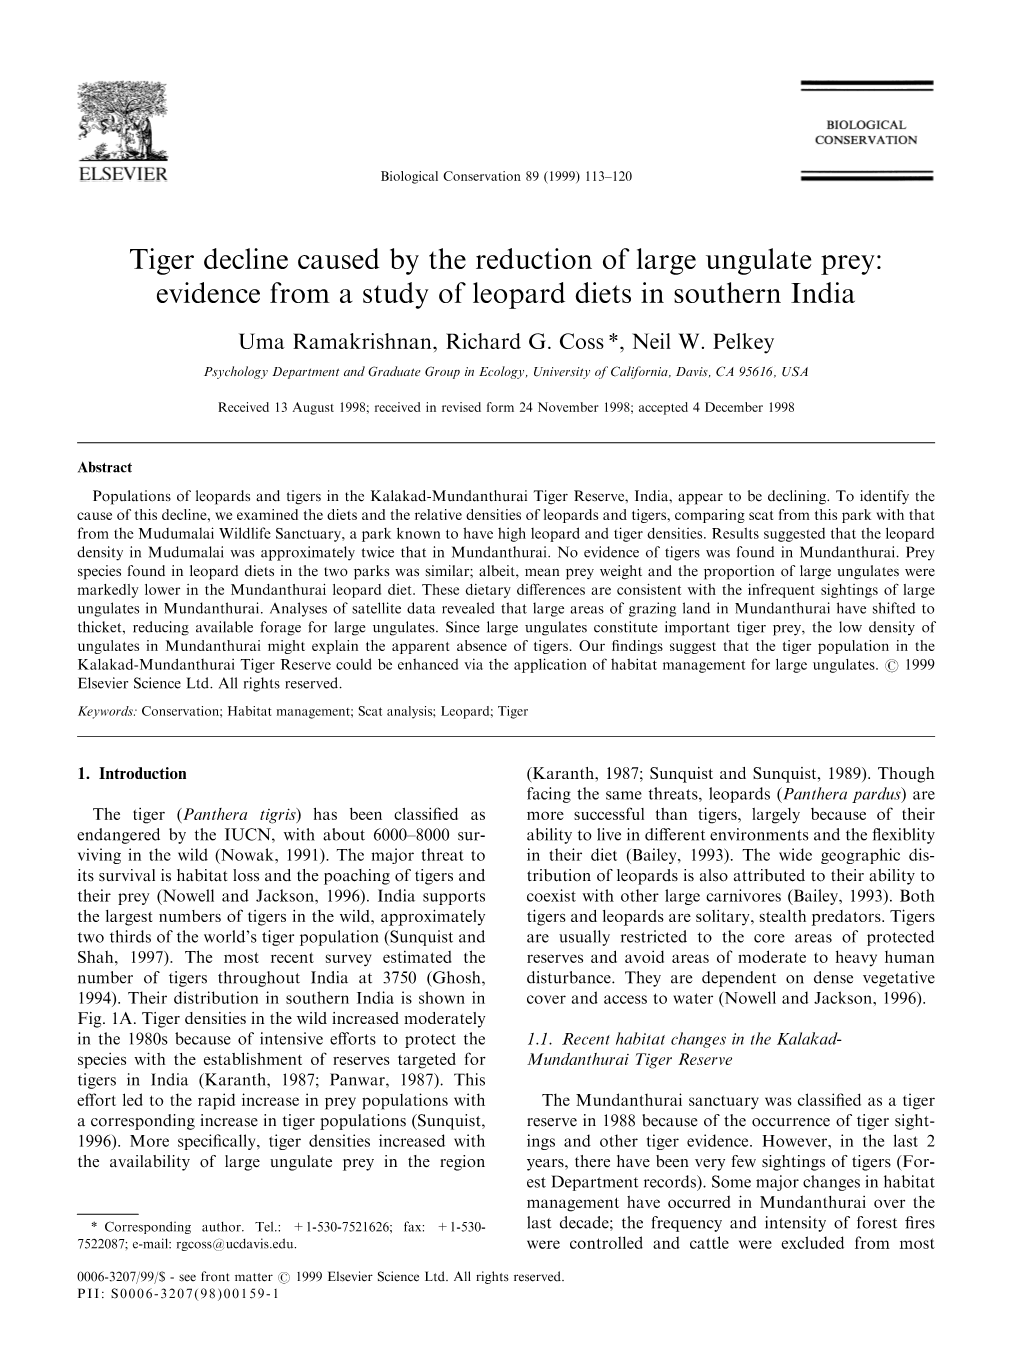 Tiger Decline Caused by the Reduction of Large Ungulate Prey: Evidence from a Study of Leopard Diets in Southern India